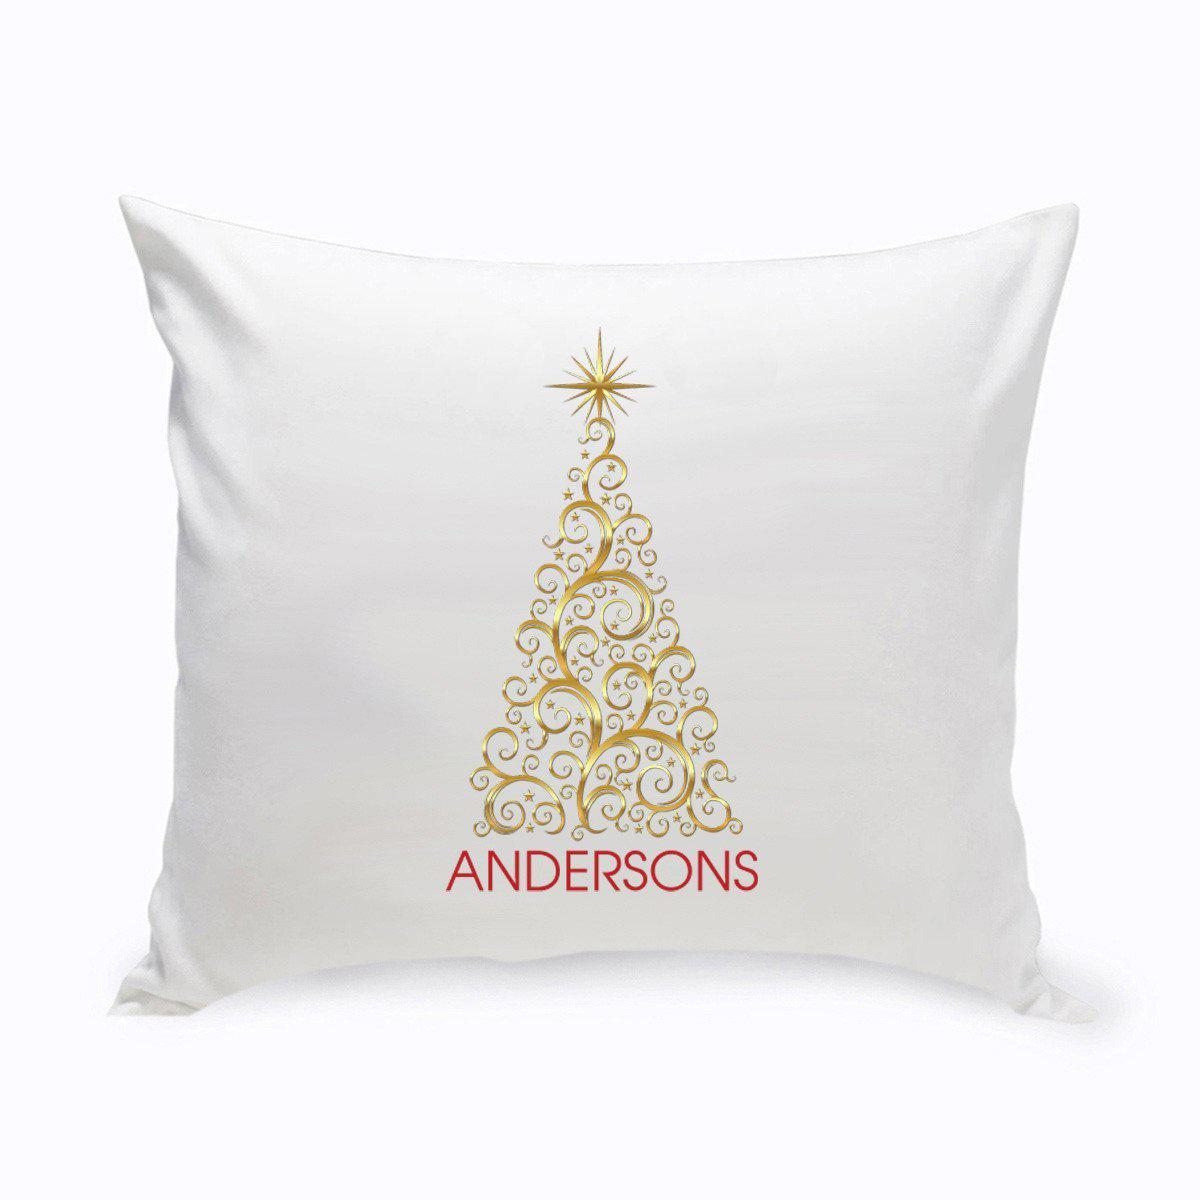 Personalized Holiday Throw Pillows - Gold Christmas Tree